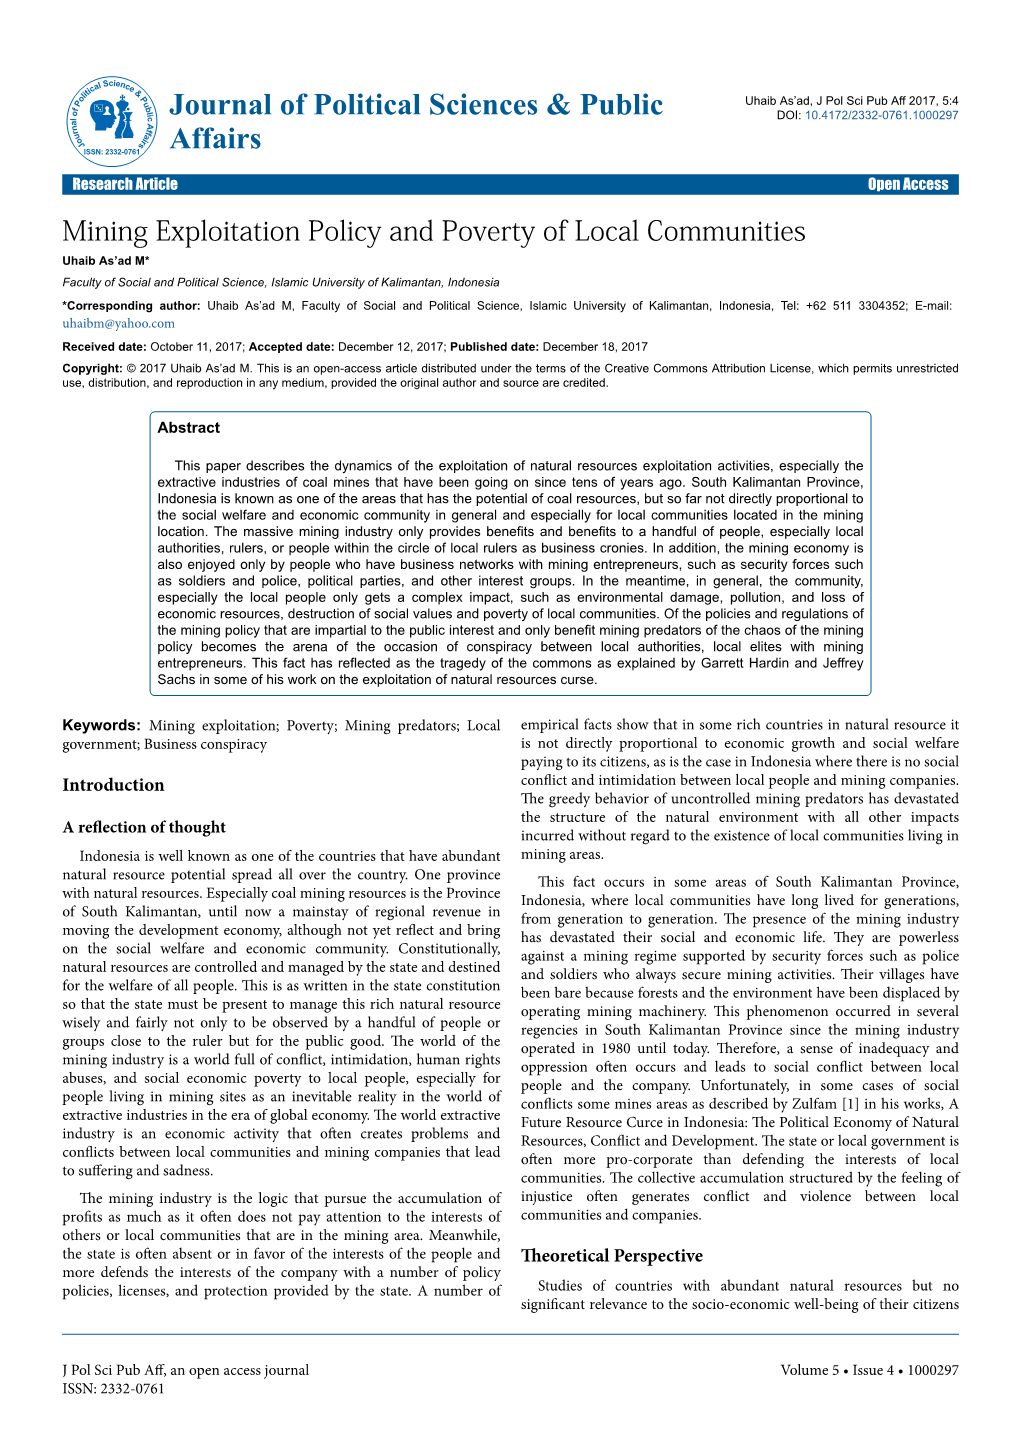 Mining Exploitation Policy and Poverty of Local Communities